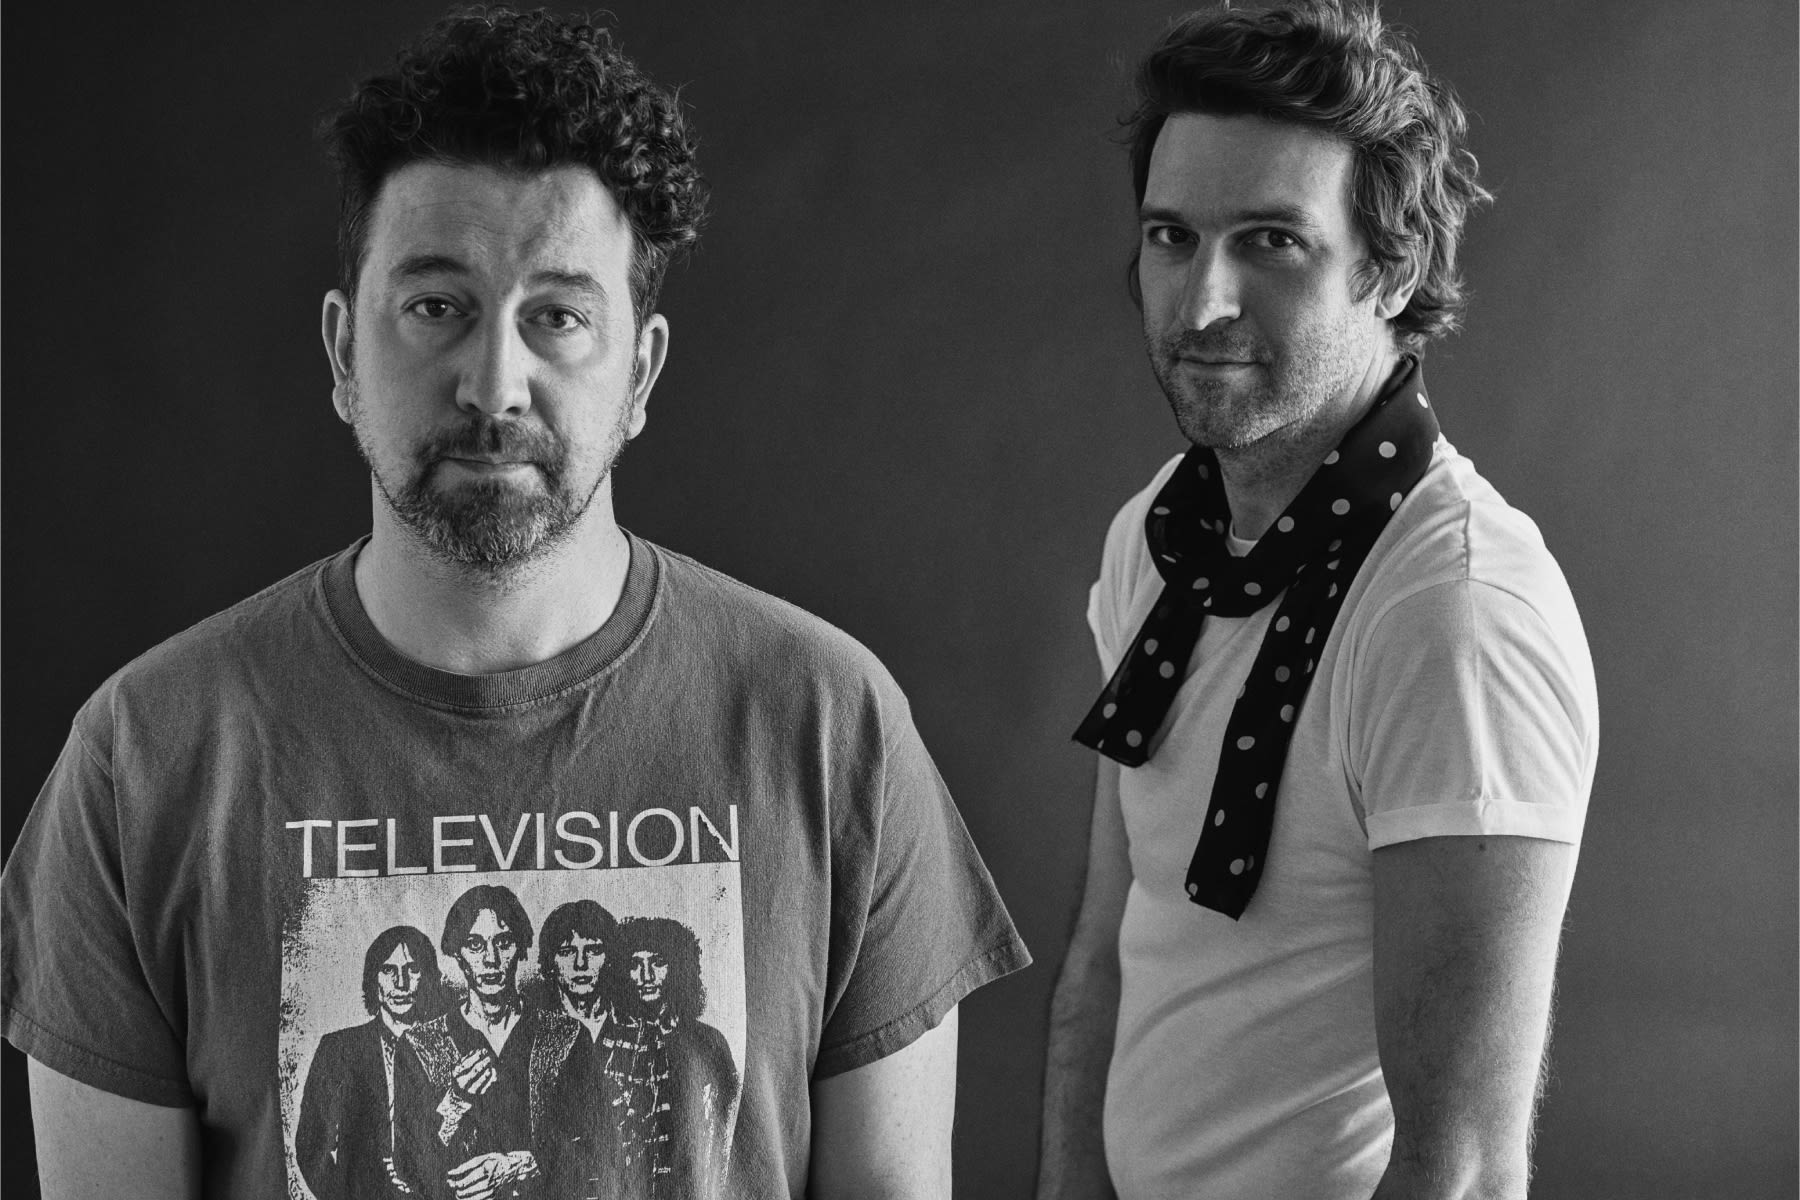 Japandroids Call It Like They See It on First New Song in Seven Years ‘Chicago’